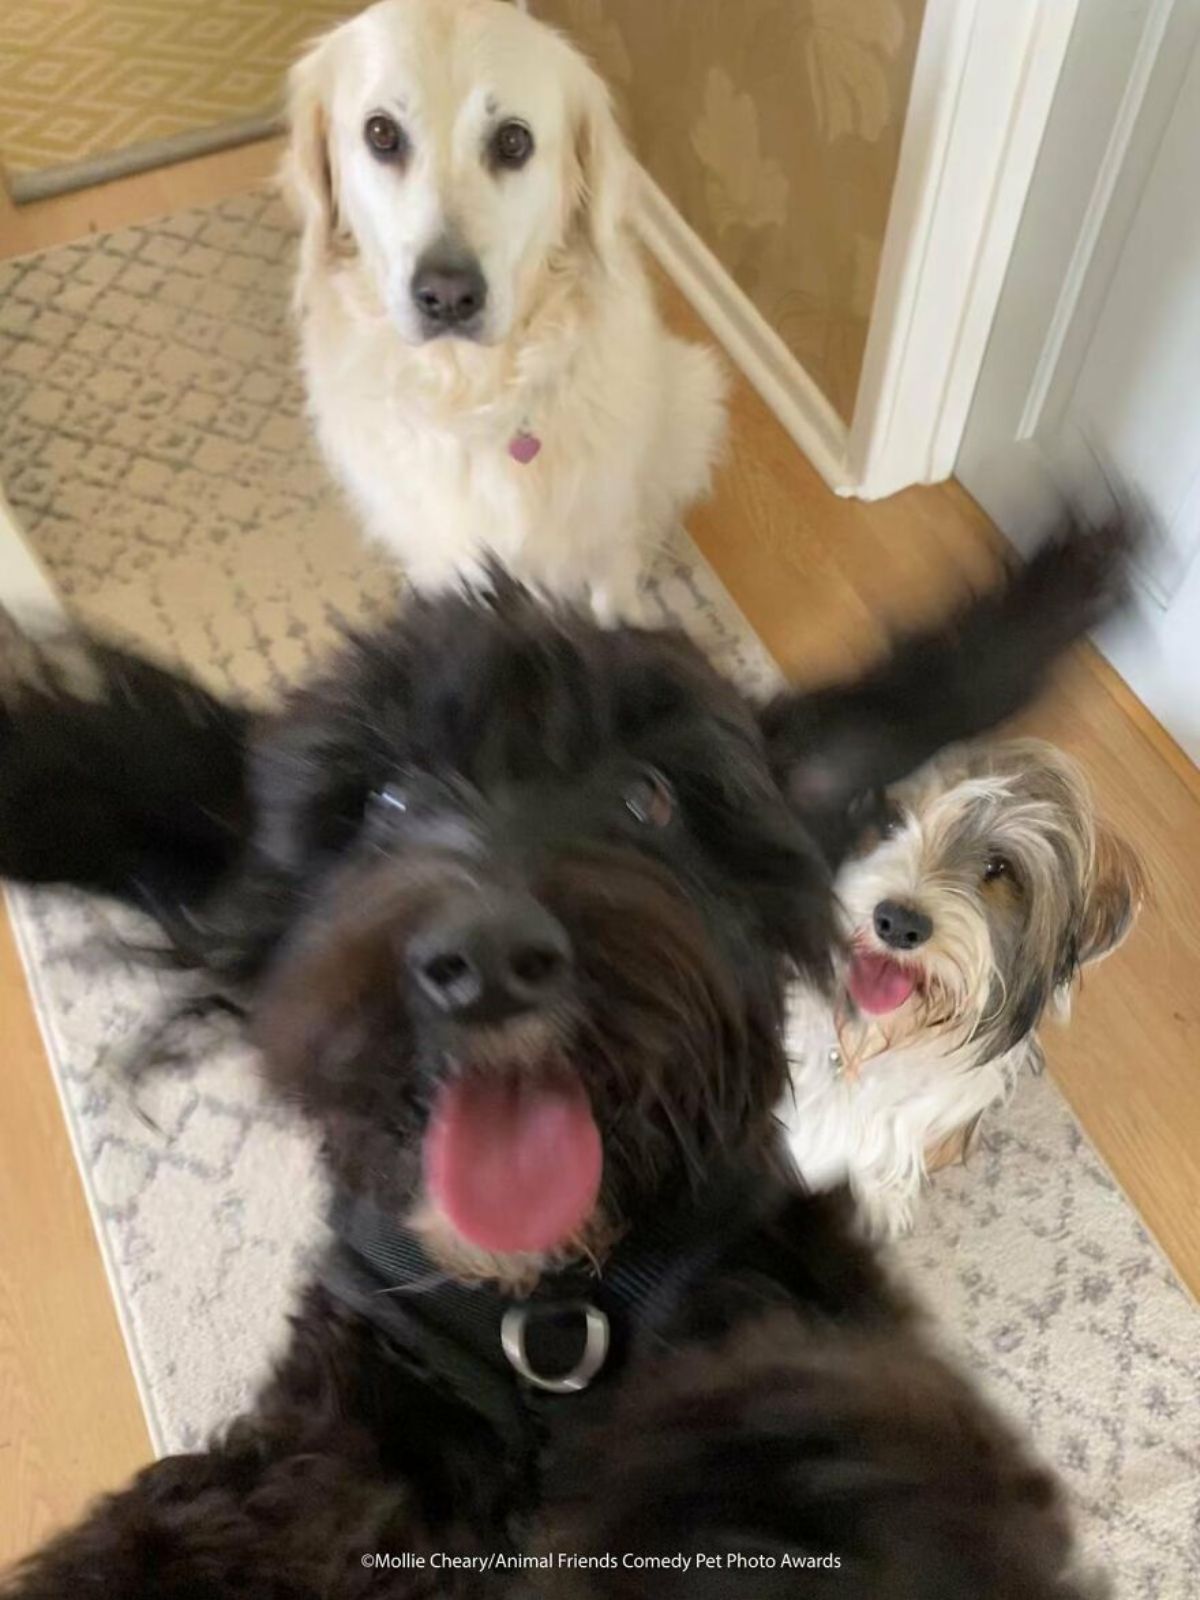 a golden retriever and a small fluffy grey and white dog sitting on the floor with a small fluffy black dog jumping up at the camera